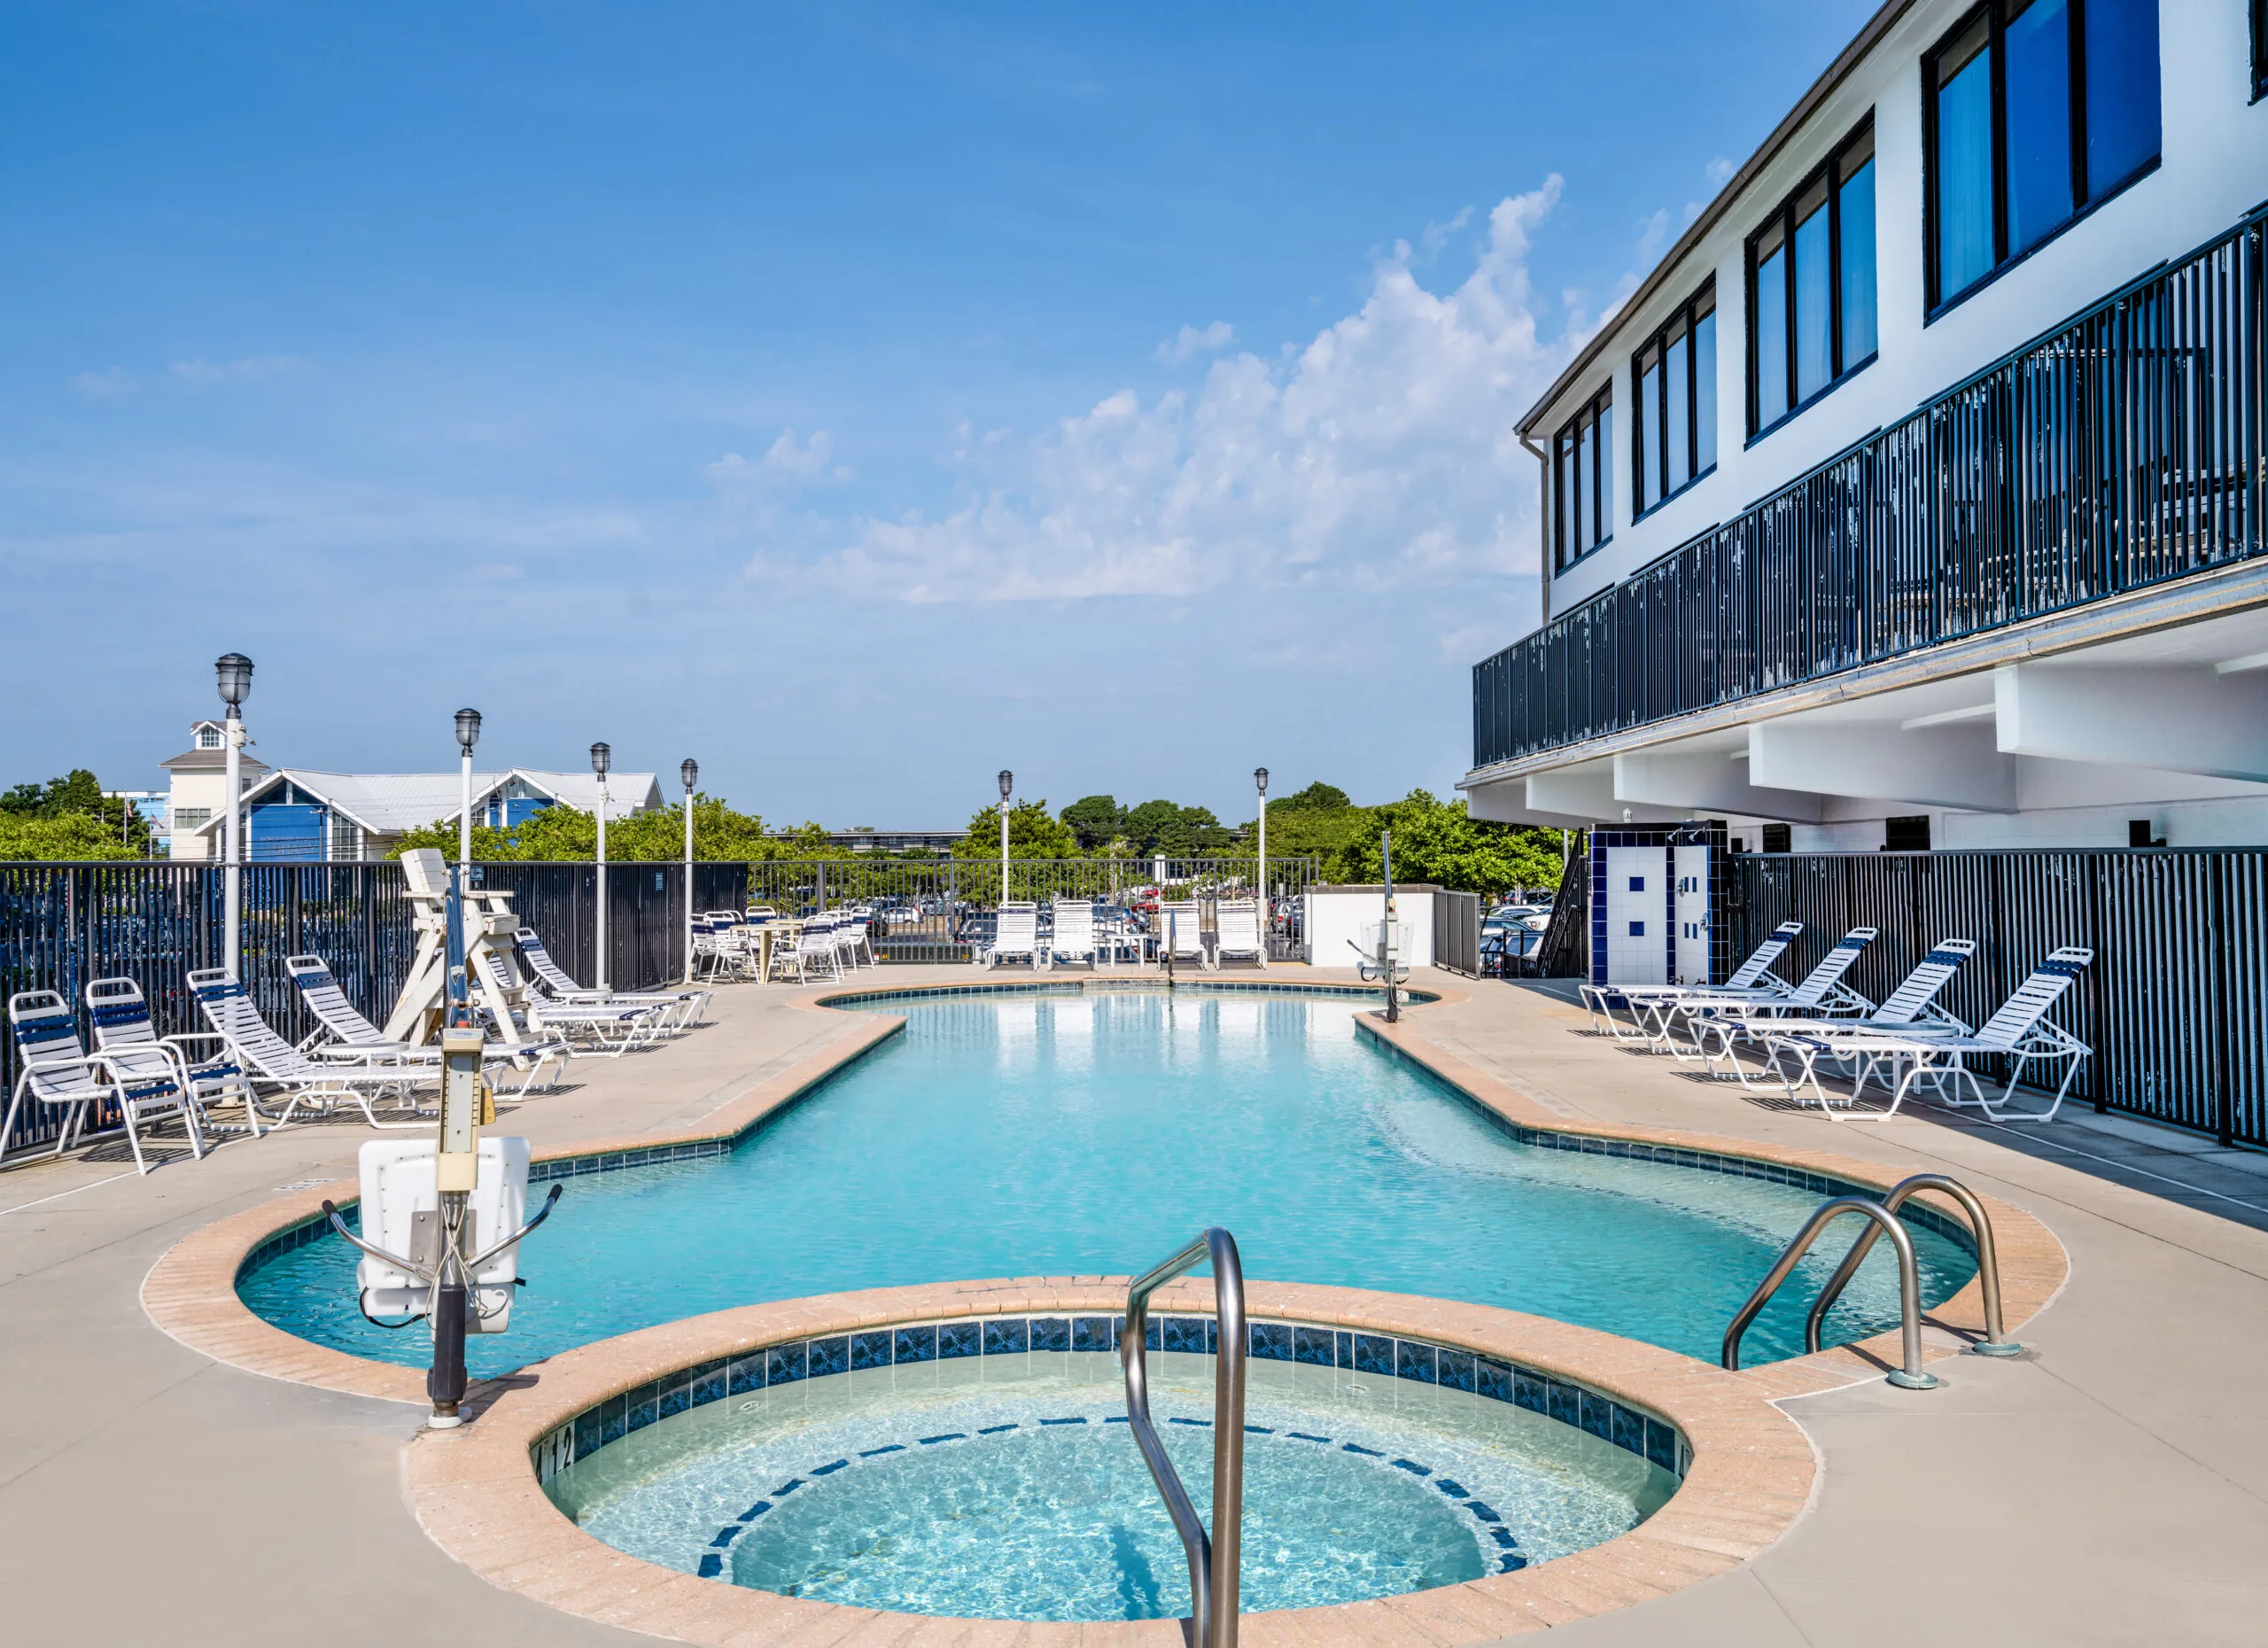 Outdoor pool with hot tub under balcony with white lounged chairs around it at Ocean City Fontainebleau Resort in Ocean City, MD